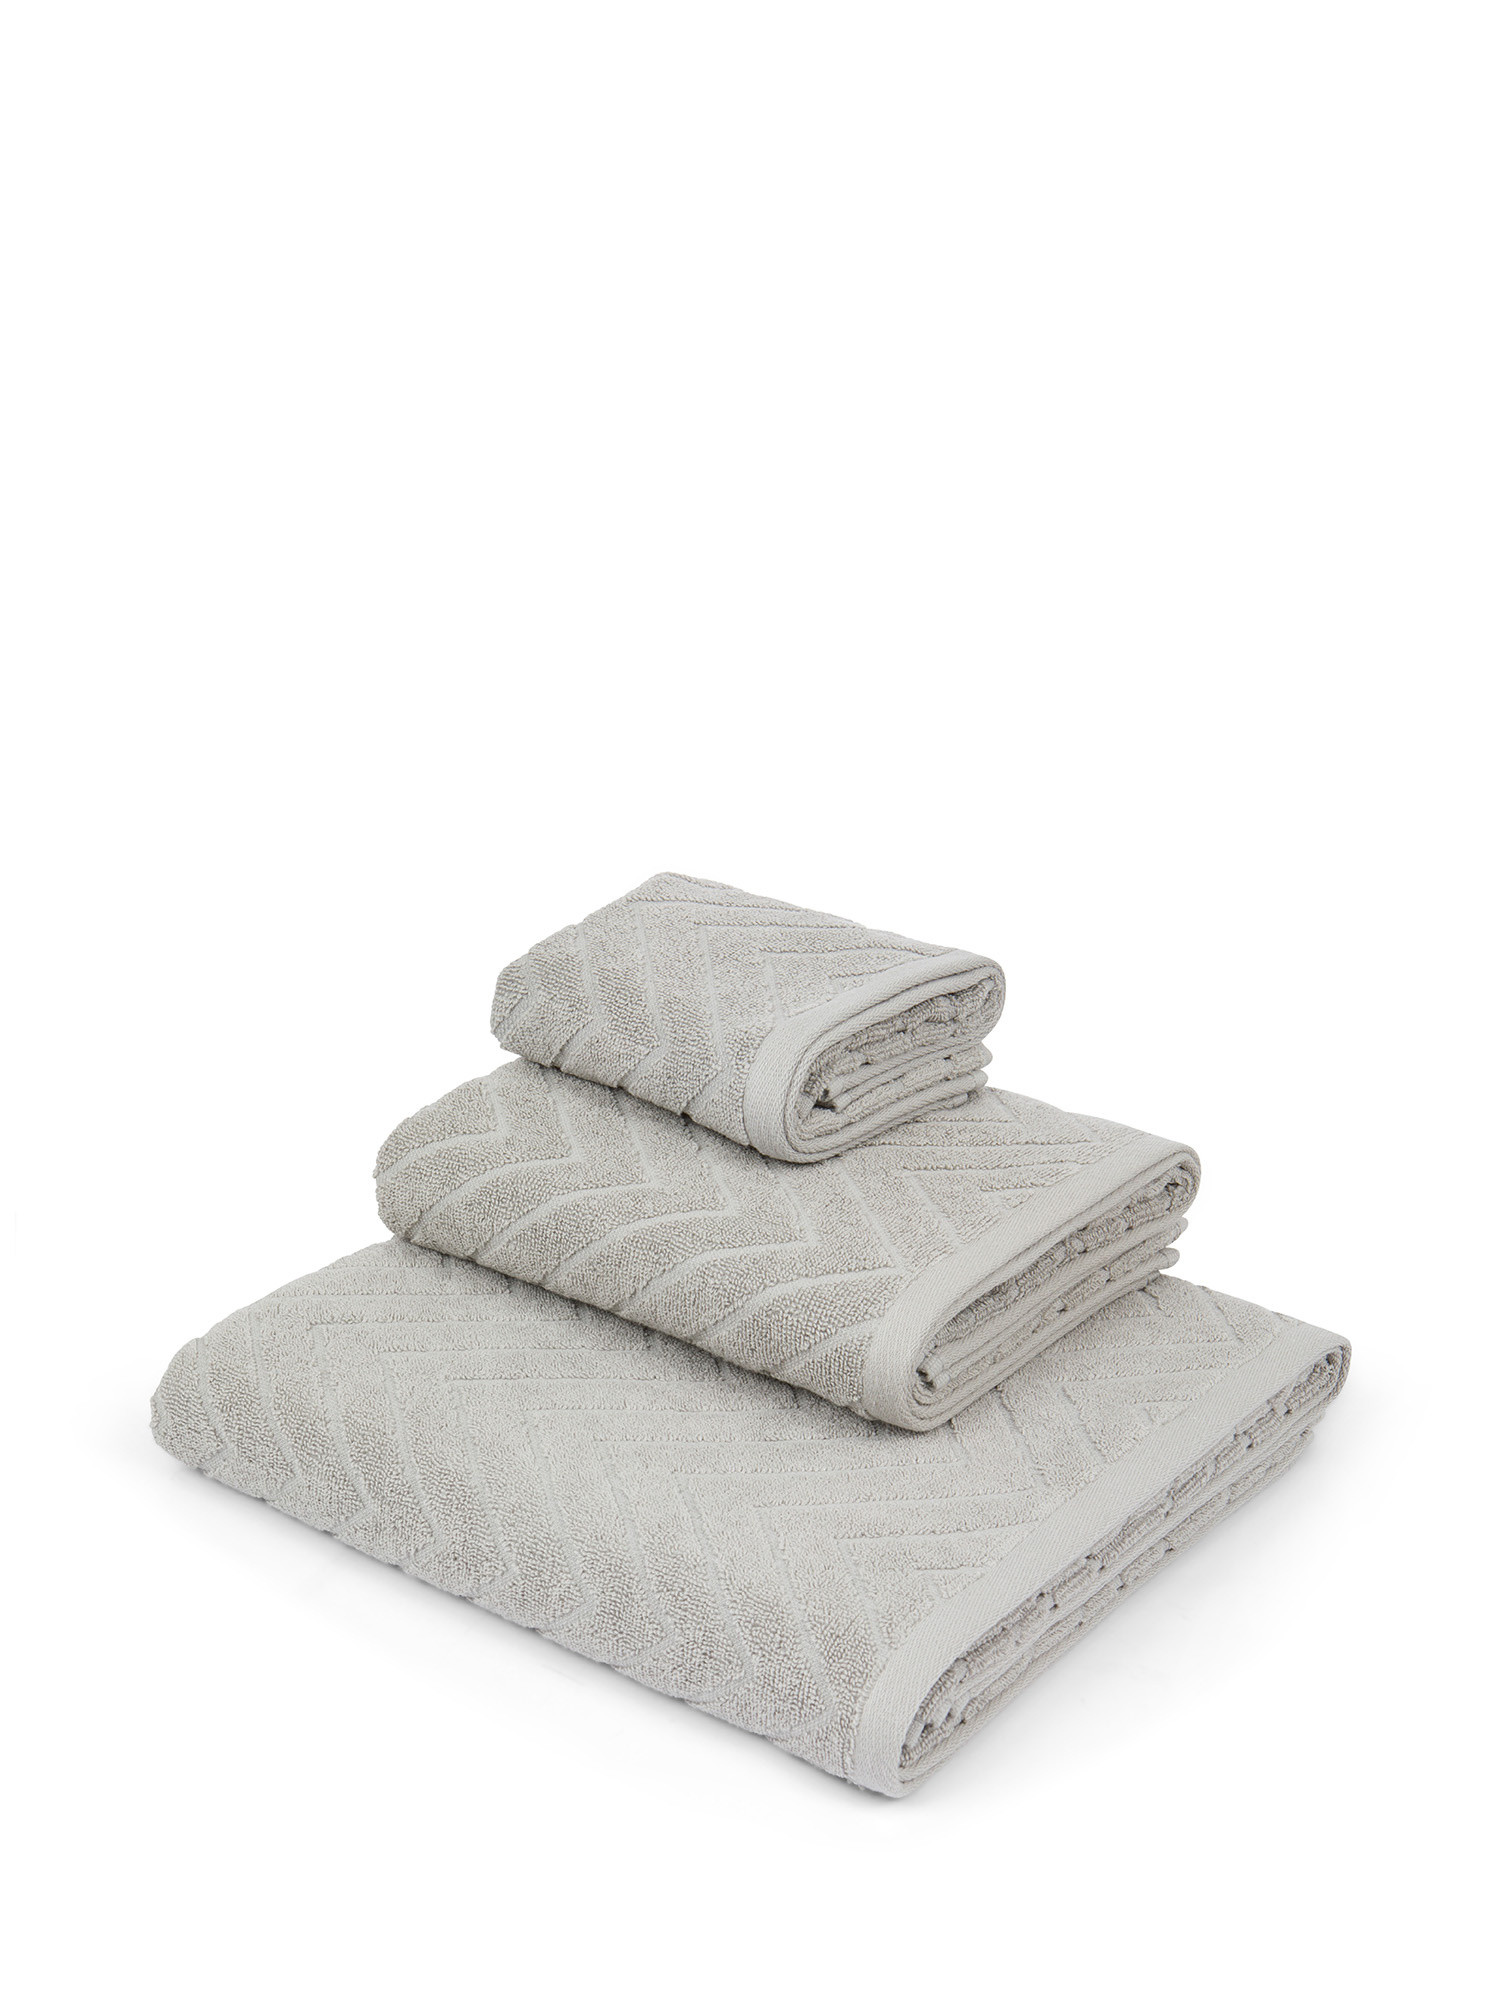 Cotton terry towel with Jacquard design, Grey, large image number 0